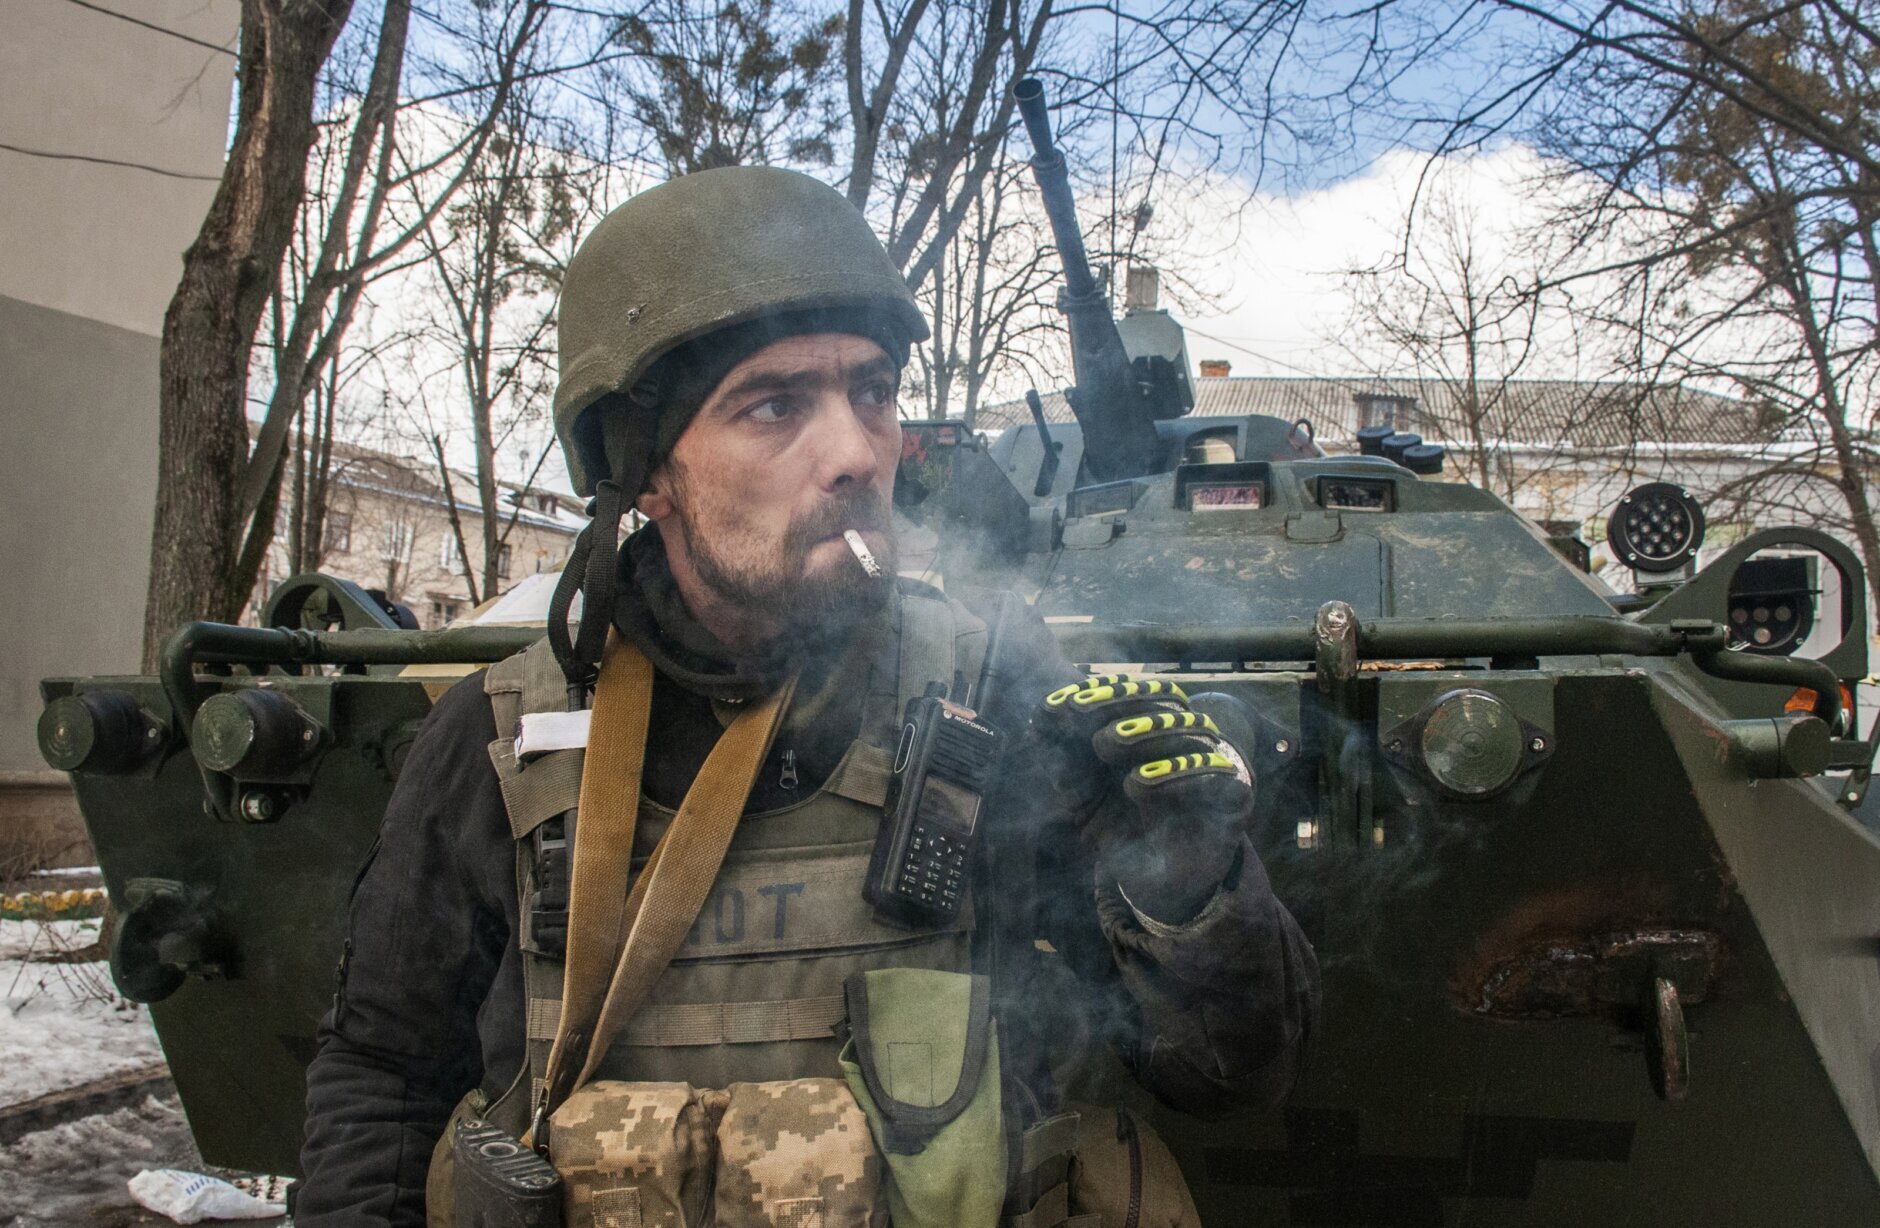 <p>A volunteer of the Ukrainian Territorial Defense Forces stands next to his APC in Kharkiv, Ukraine, Wednesday, March 16, 2022. NATO Secretary-General Jens Stoltenberg made it clear Tuesday that the 30-nation military alliance is set to radically change its security stance in Europe in response to Russia&#8217;s war on Ukraine.</p>
